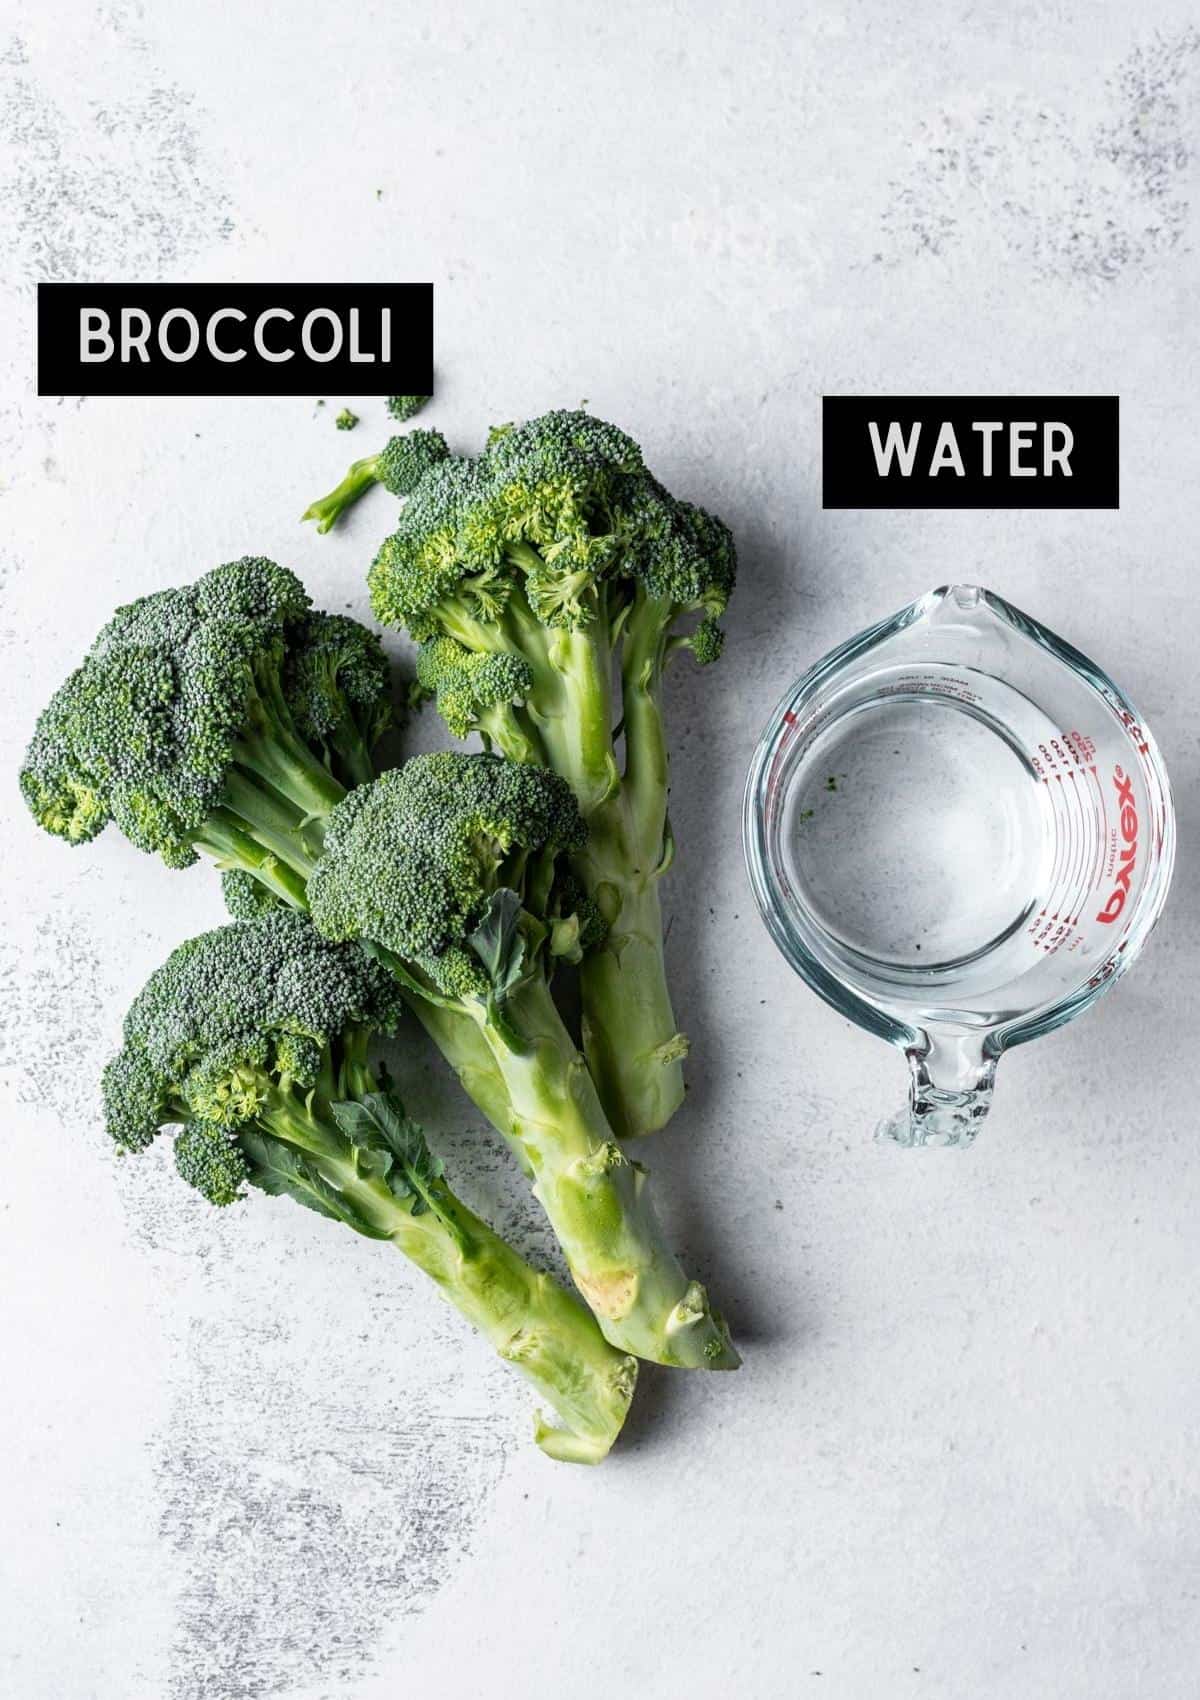 Labelled ingredients for instant pot broccoli (see recipe for details).